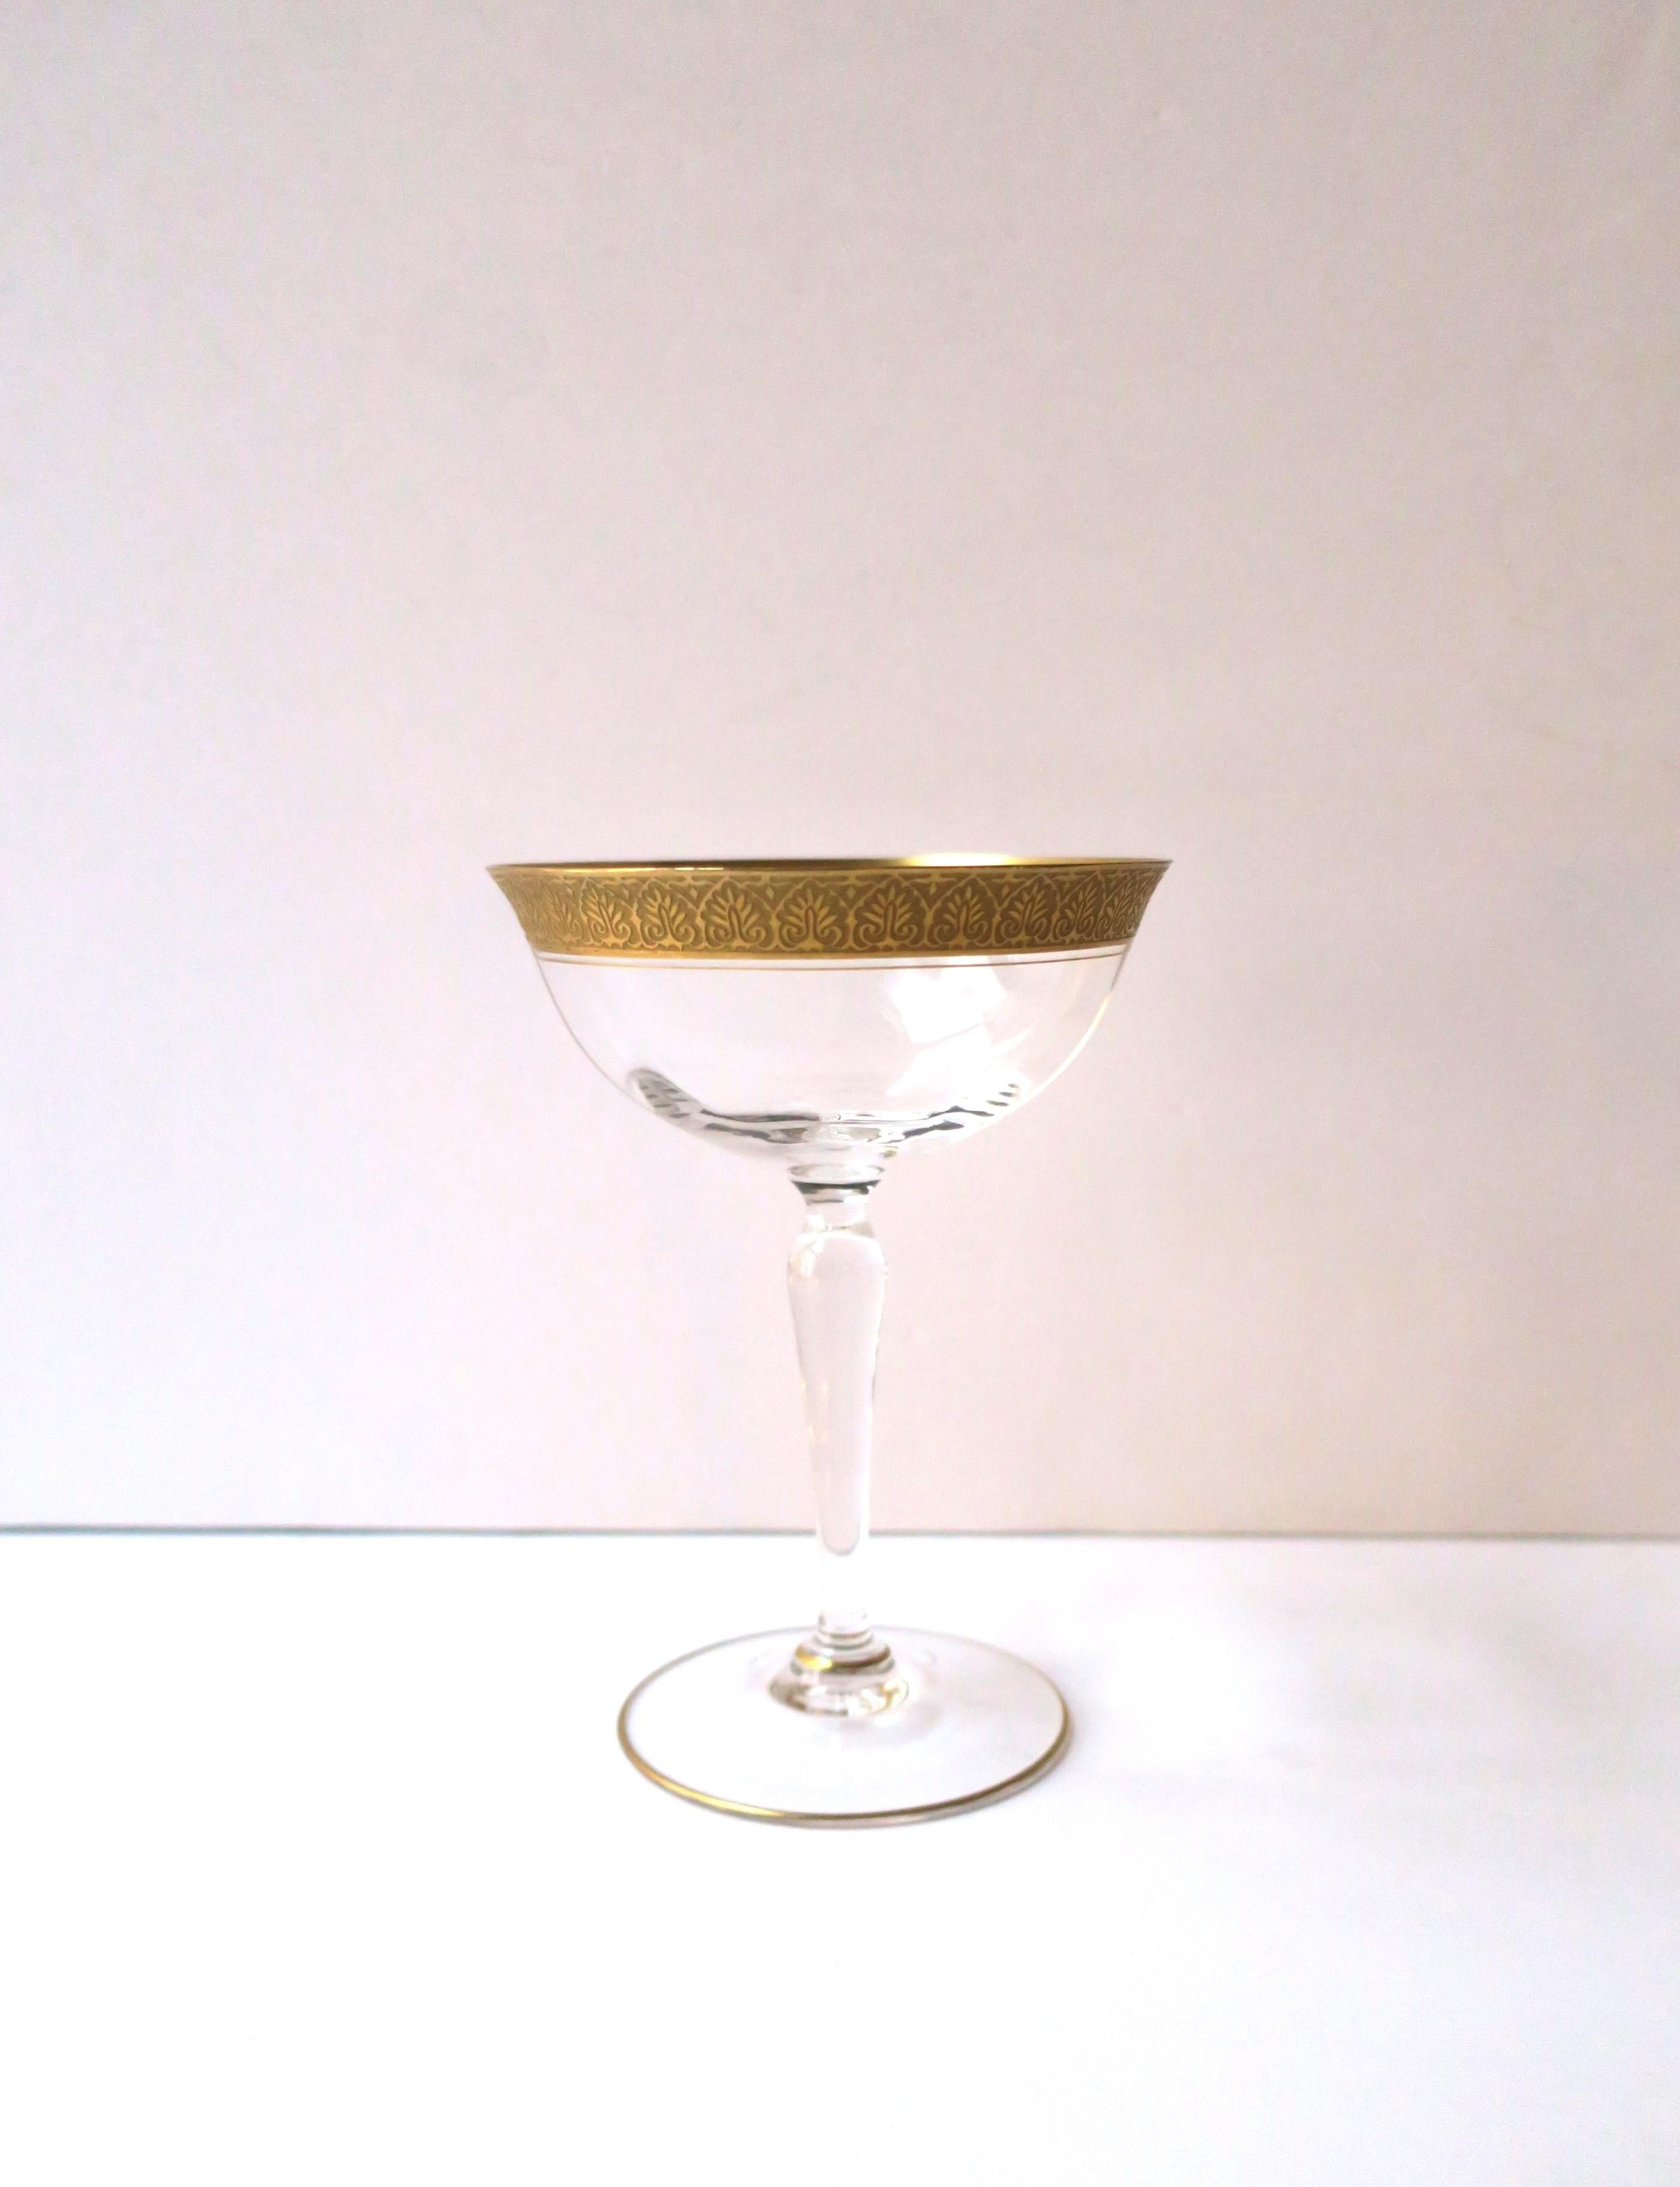 European Champagne Coupes Cocktail Glasses with Gold Rim, Pair For Sale